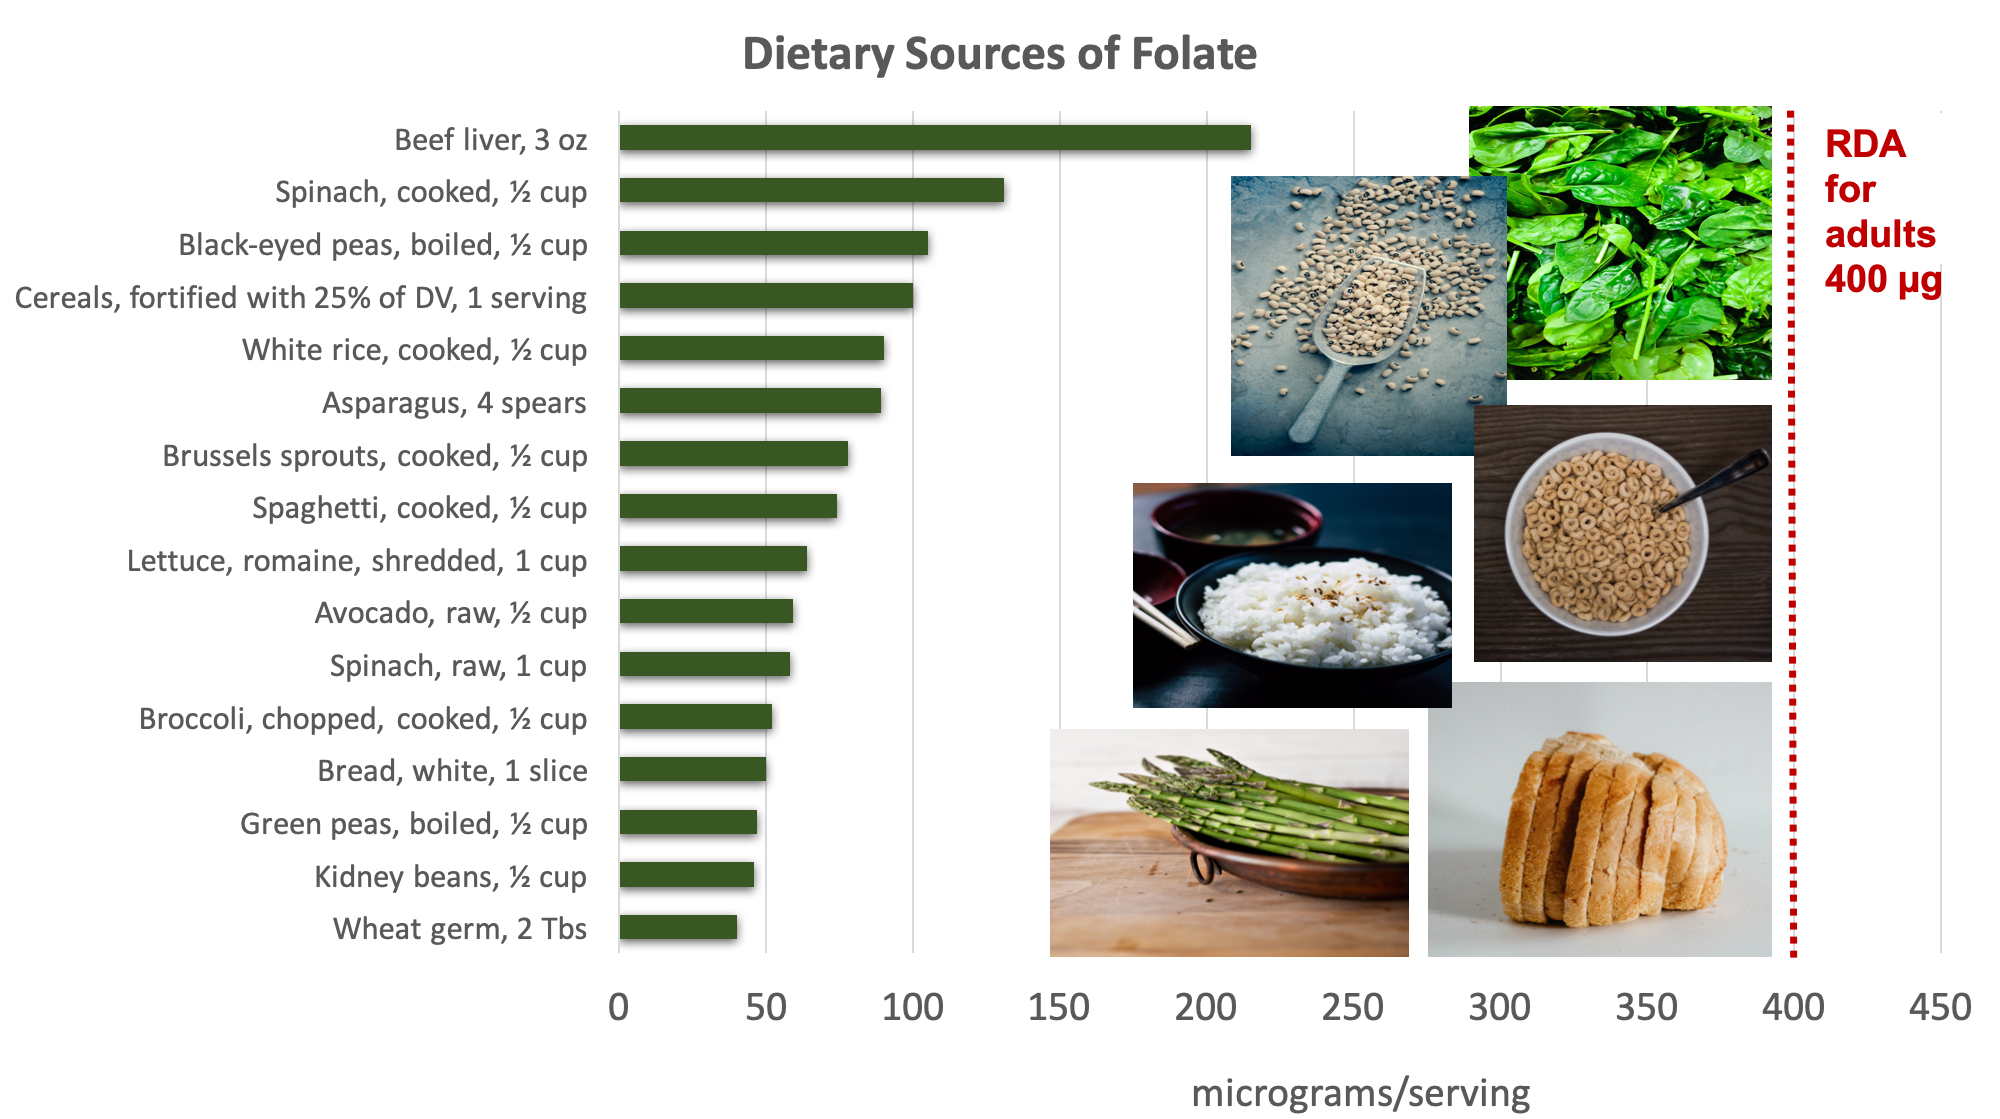 Bar graph showing dietary sources of folate compared with the RDA adults of 400 micrograms. Top sources include liver, darky leafy green, legumes, and fortified cereals and grains. Food sources pictured include spinach, black-eyed peas, cereal, rice, asparagus, bread.